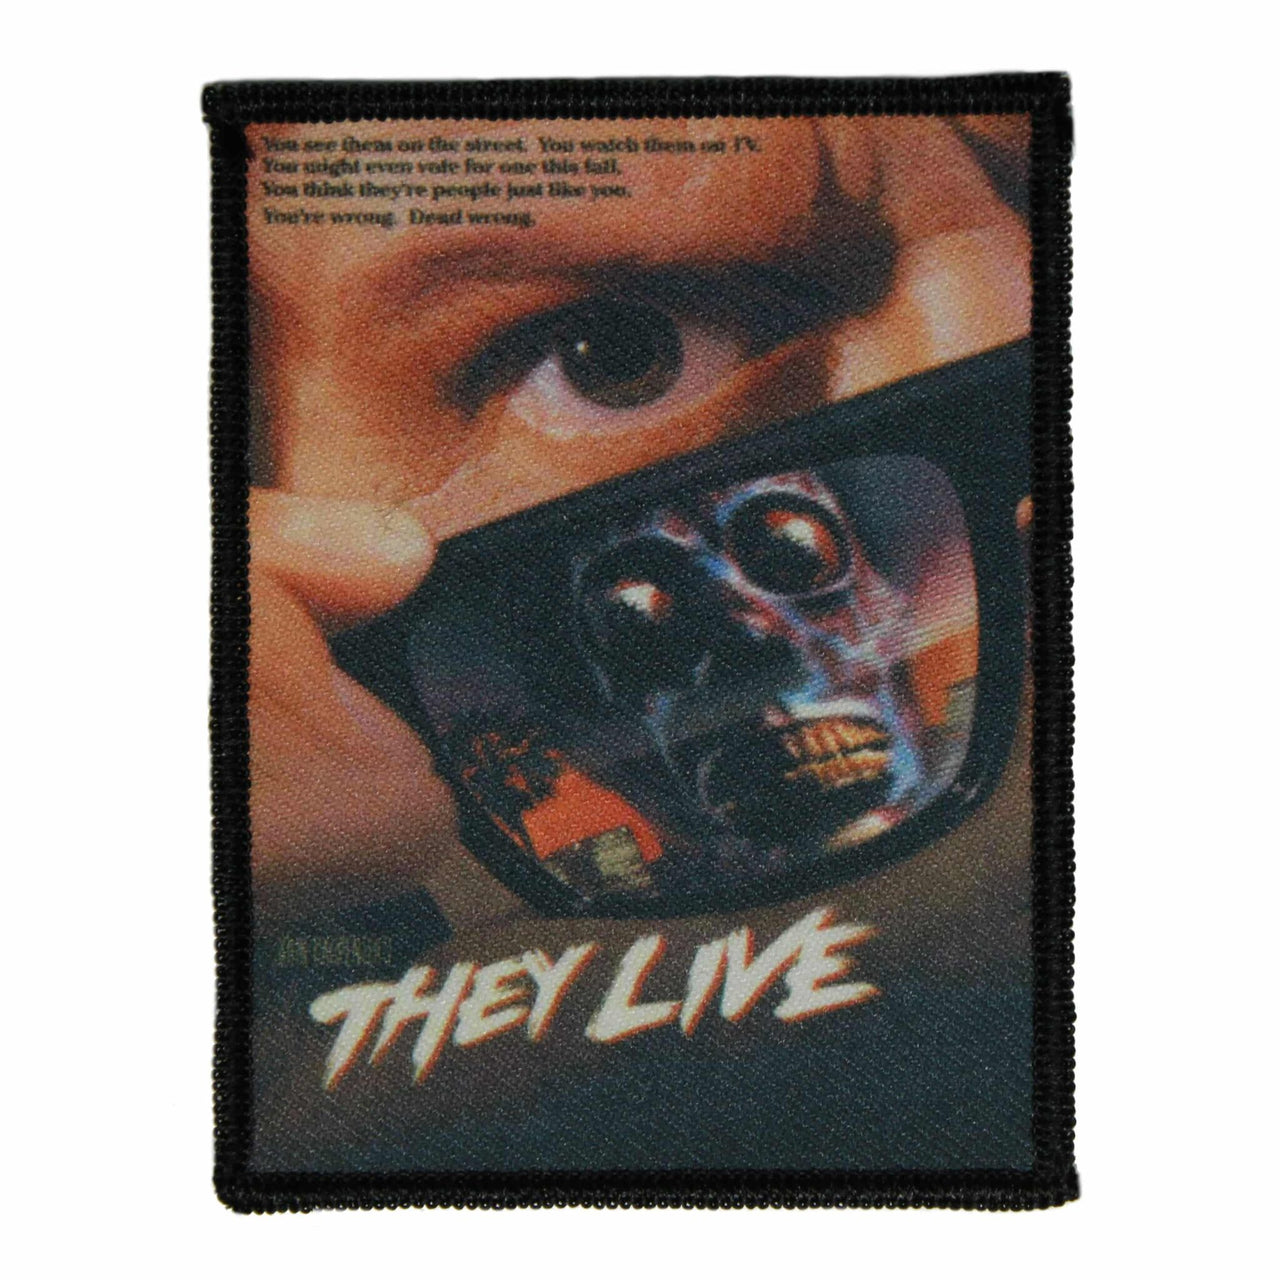 They Live Patch